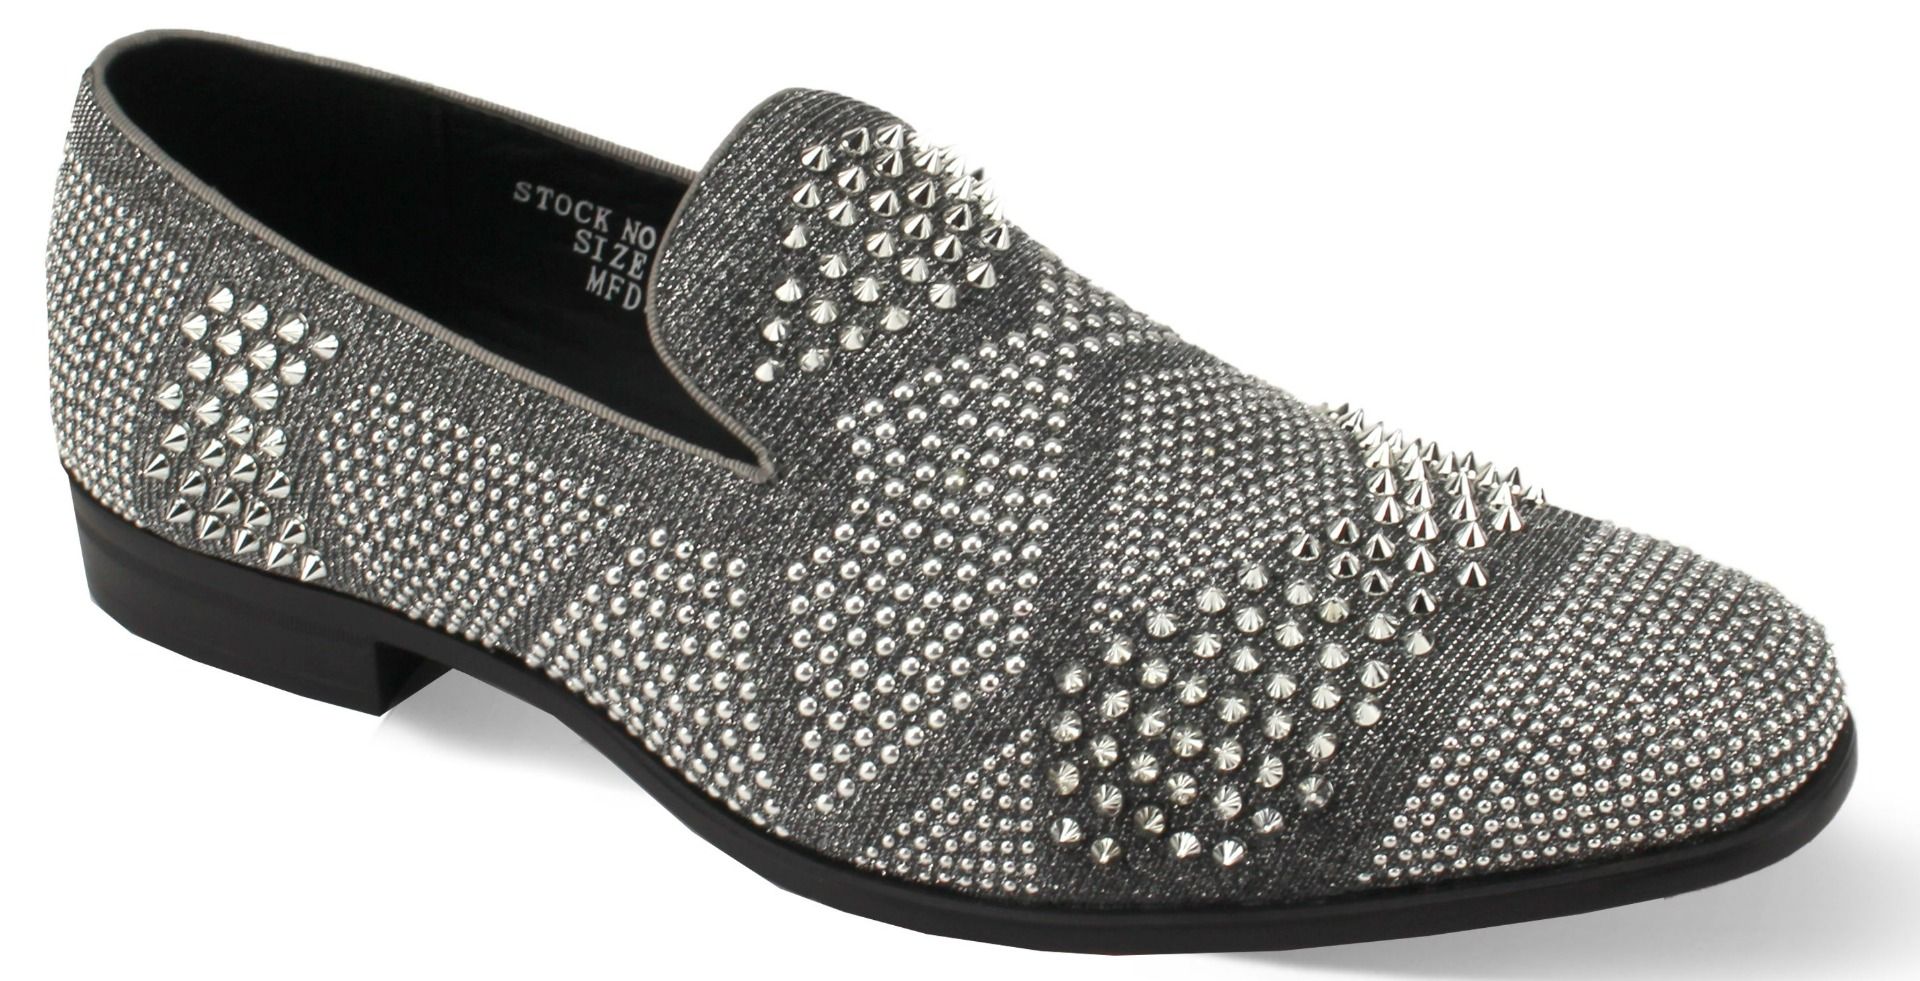 After Midnight Men's Outlet Fashion Dress Shoes - Geometric Spikes